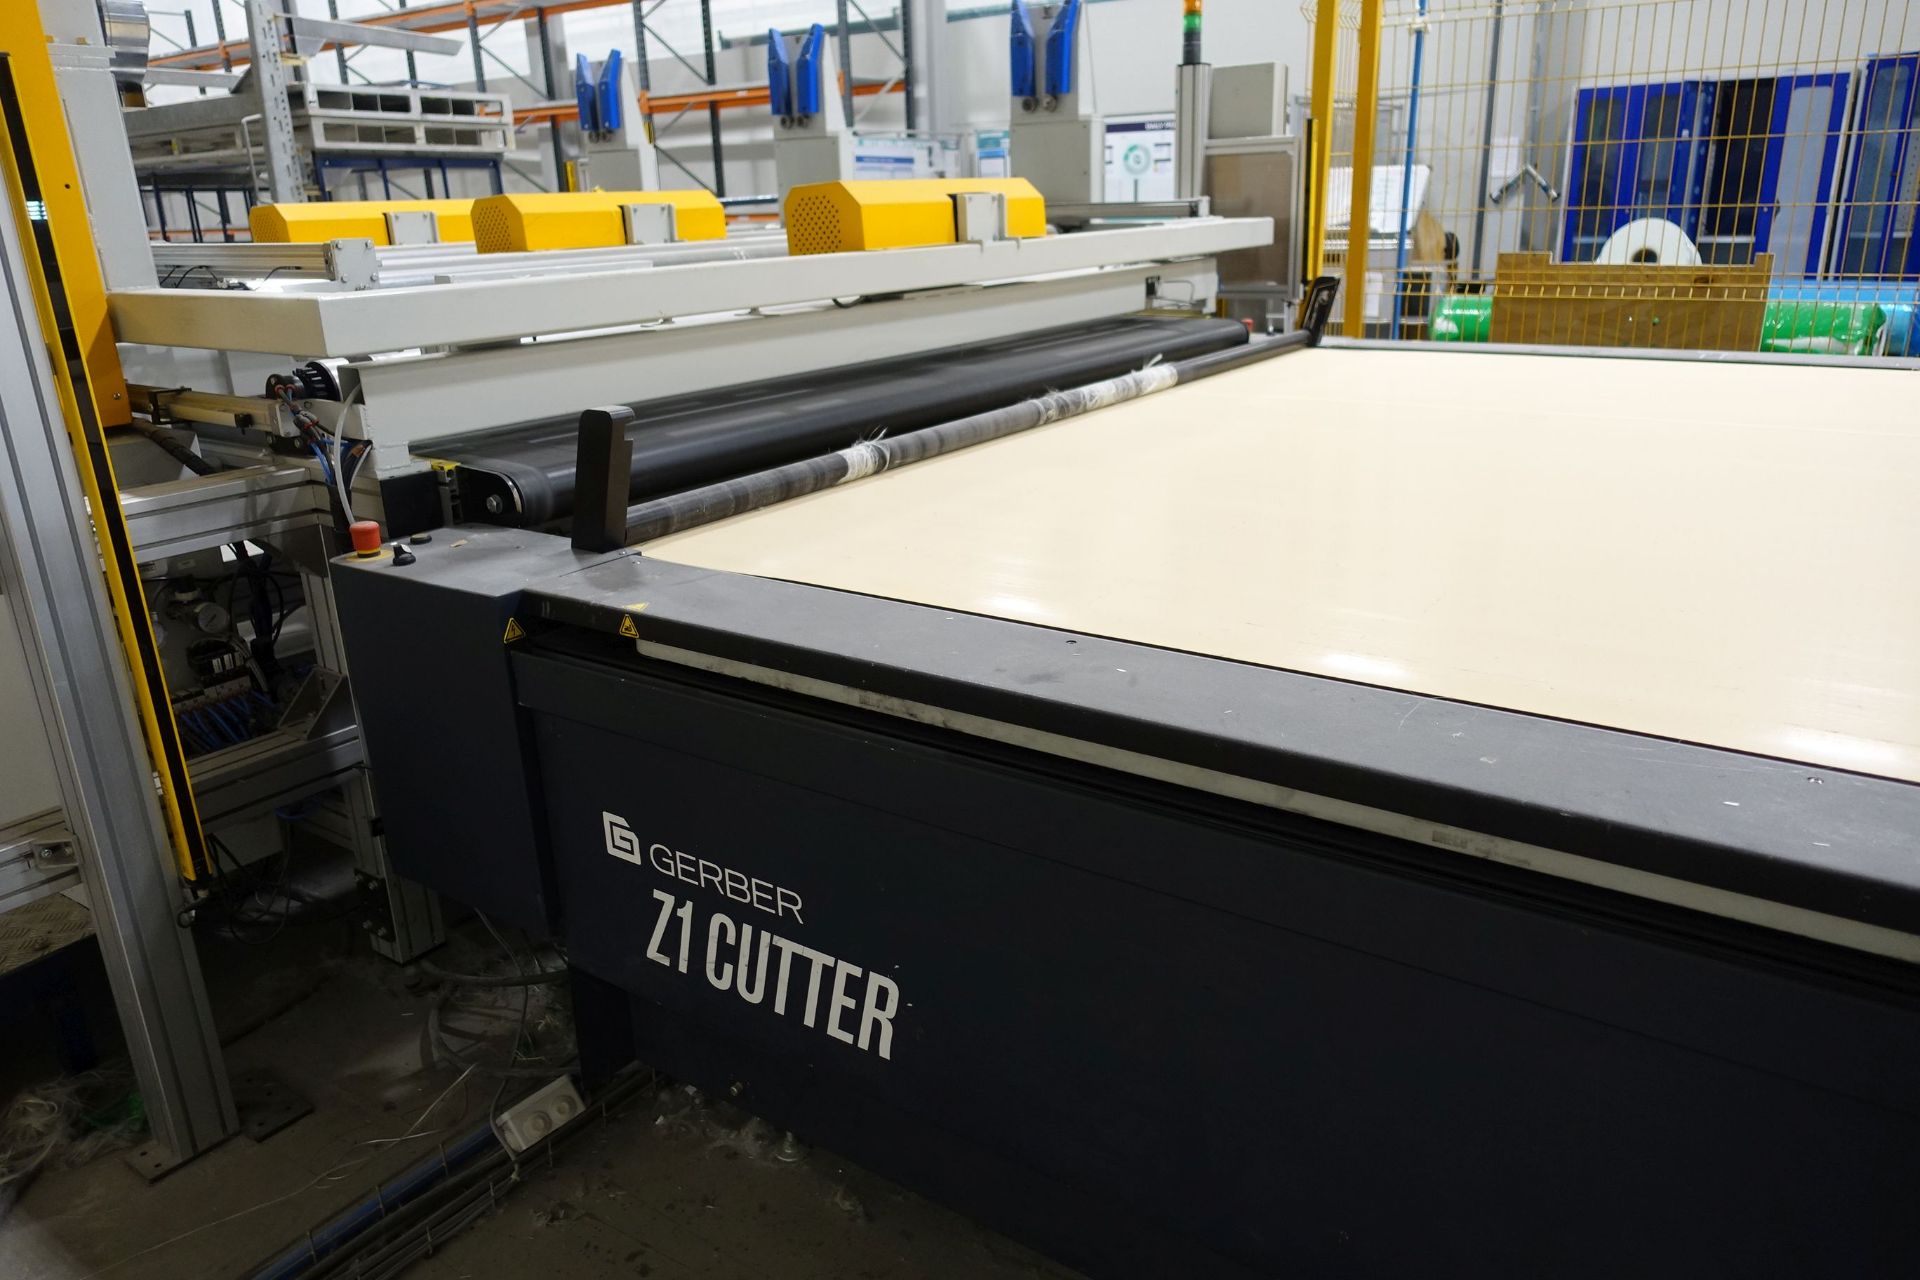 GERBER 'Z1 CUTTER' Materials Dry Cutting Machine, 6-Roll Feed Stand, CC Sistemas '282' Feeder - Image 19 of 39